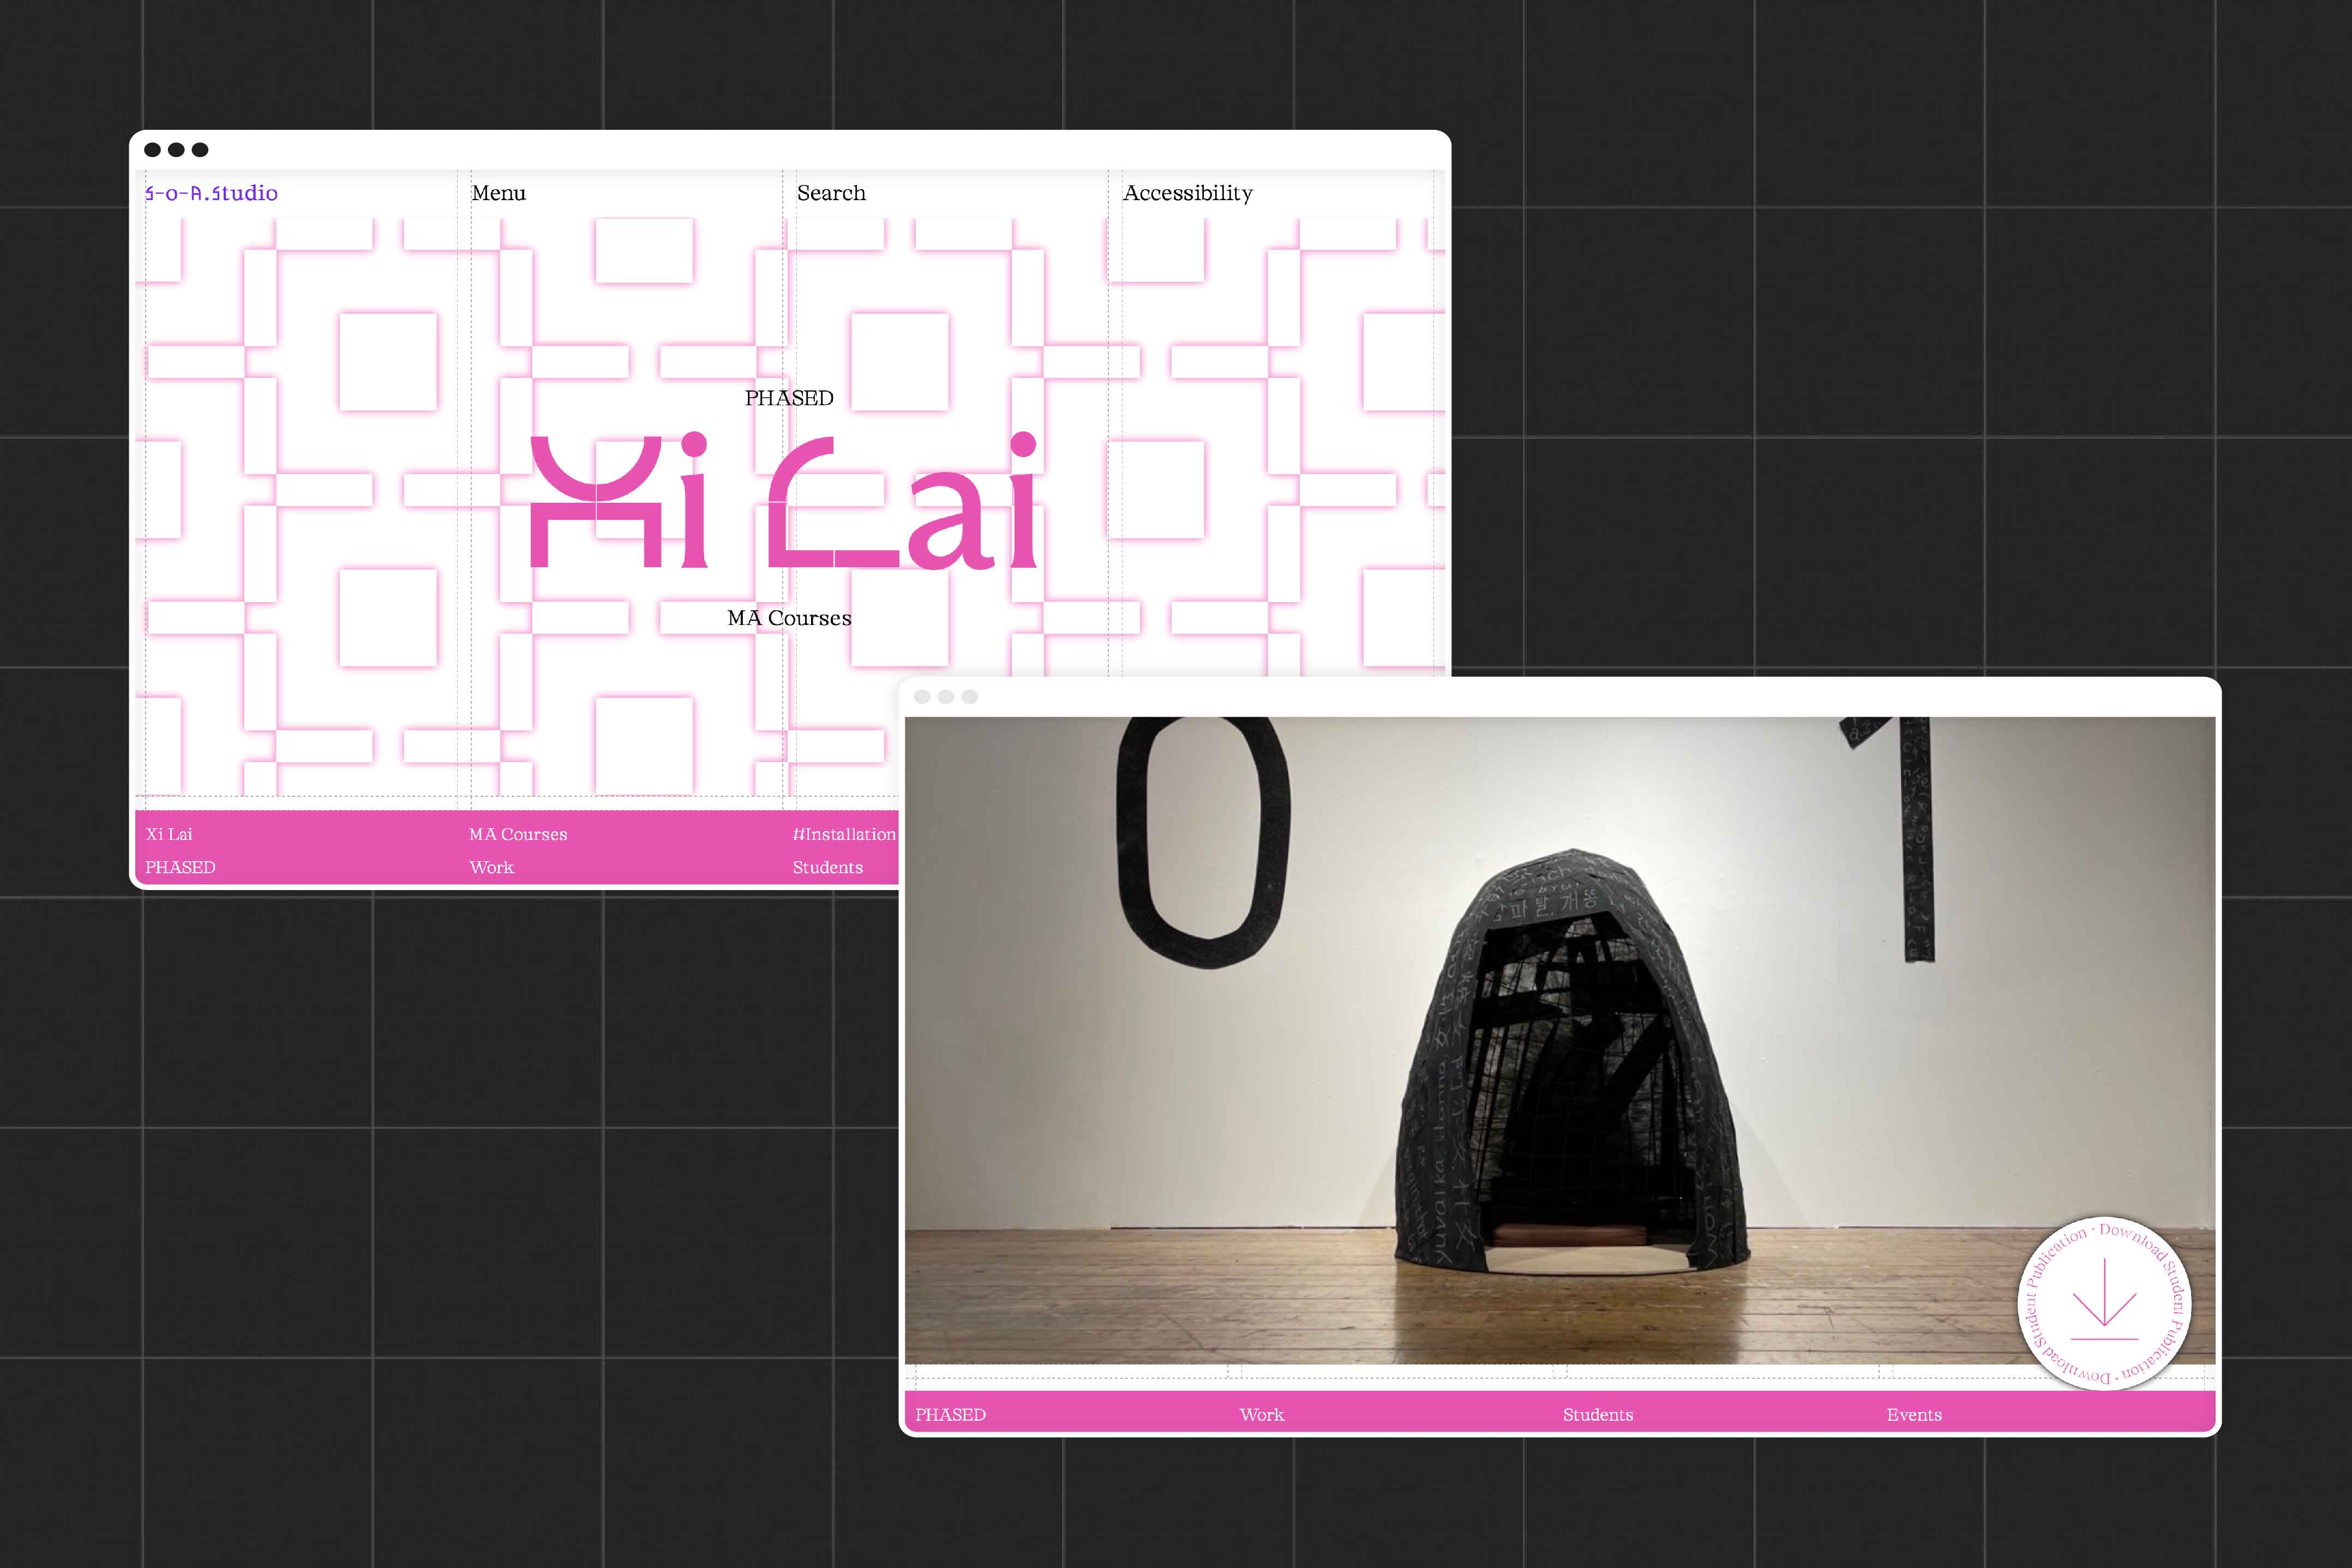 Website images showing Xi Lai's work, the first image shows the Xi Lai's name in the branding fonts, pink and stylish, merging the two fonts together. The second image shows an image of Xi Lai's work.